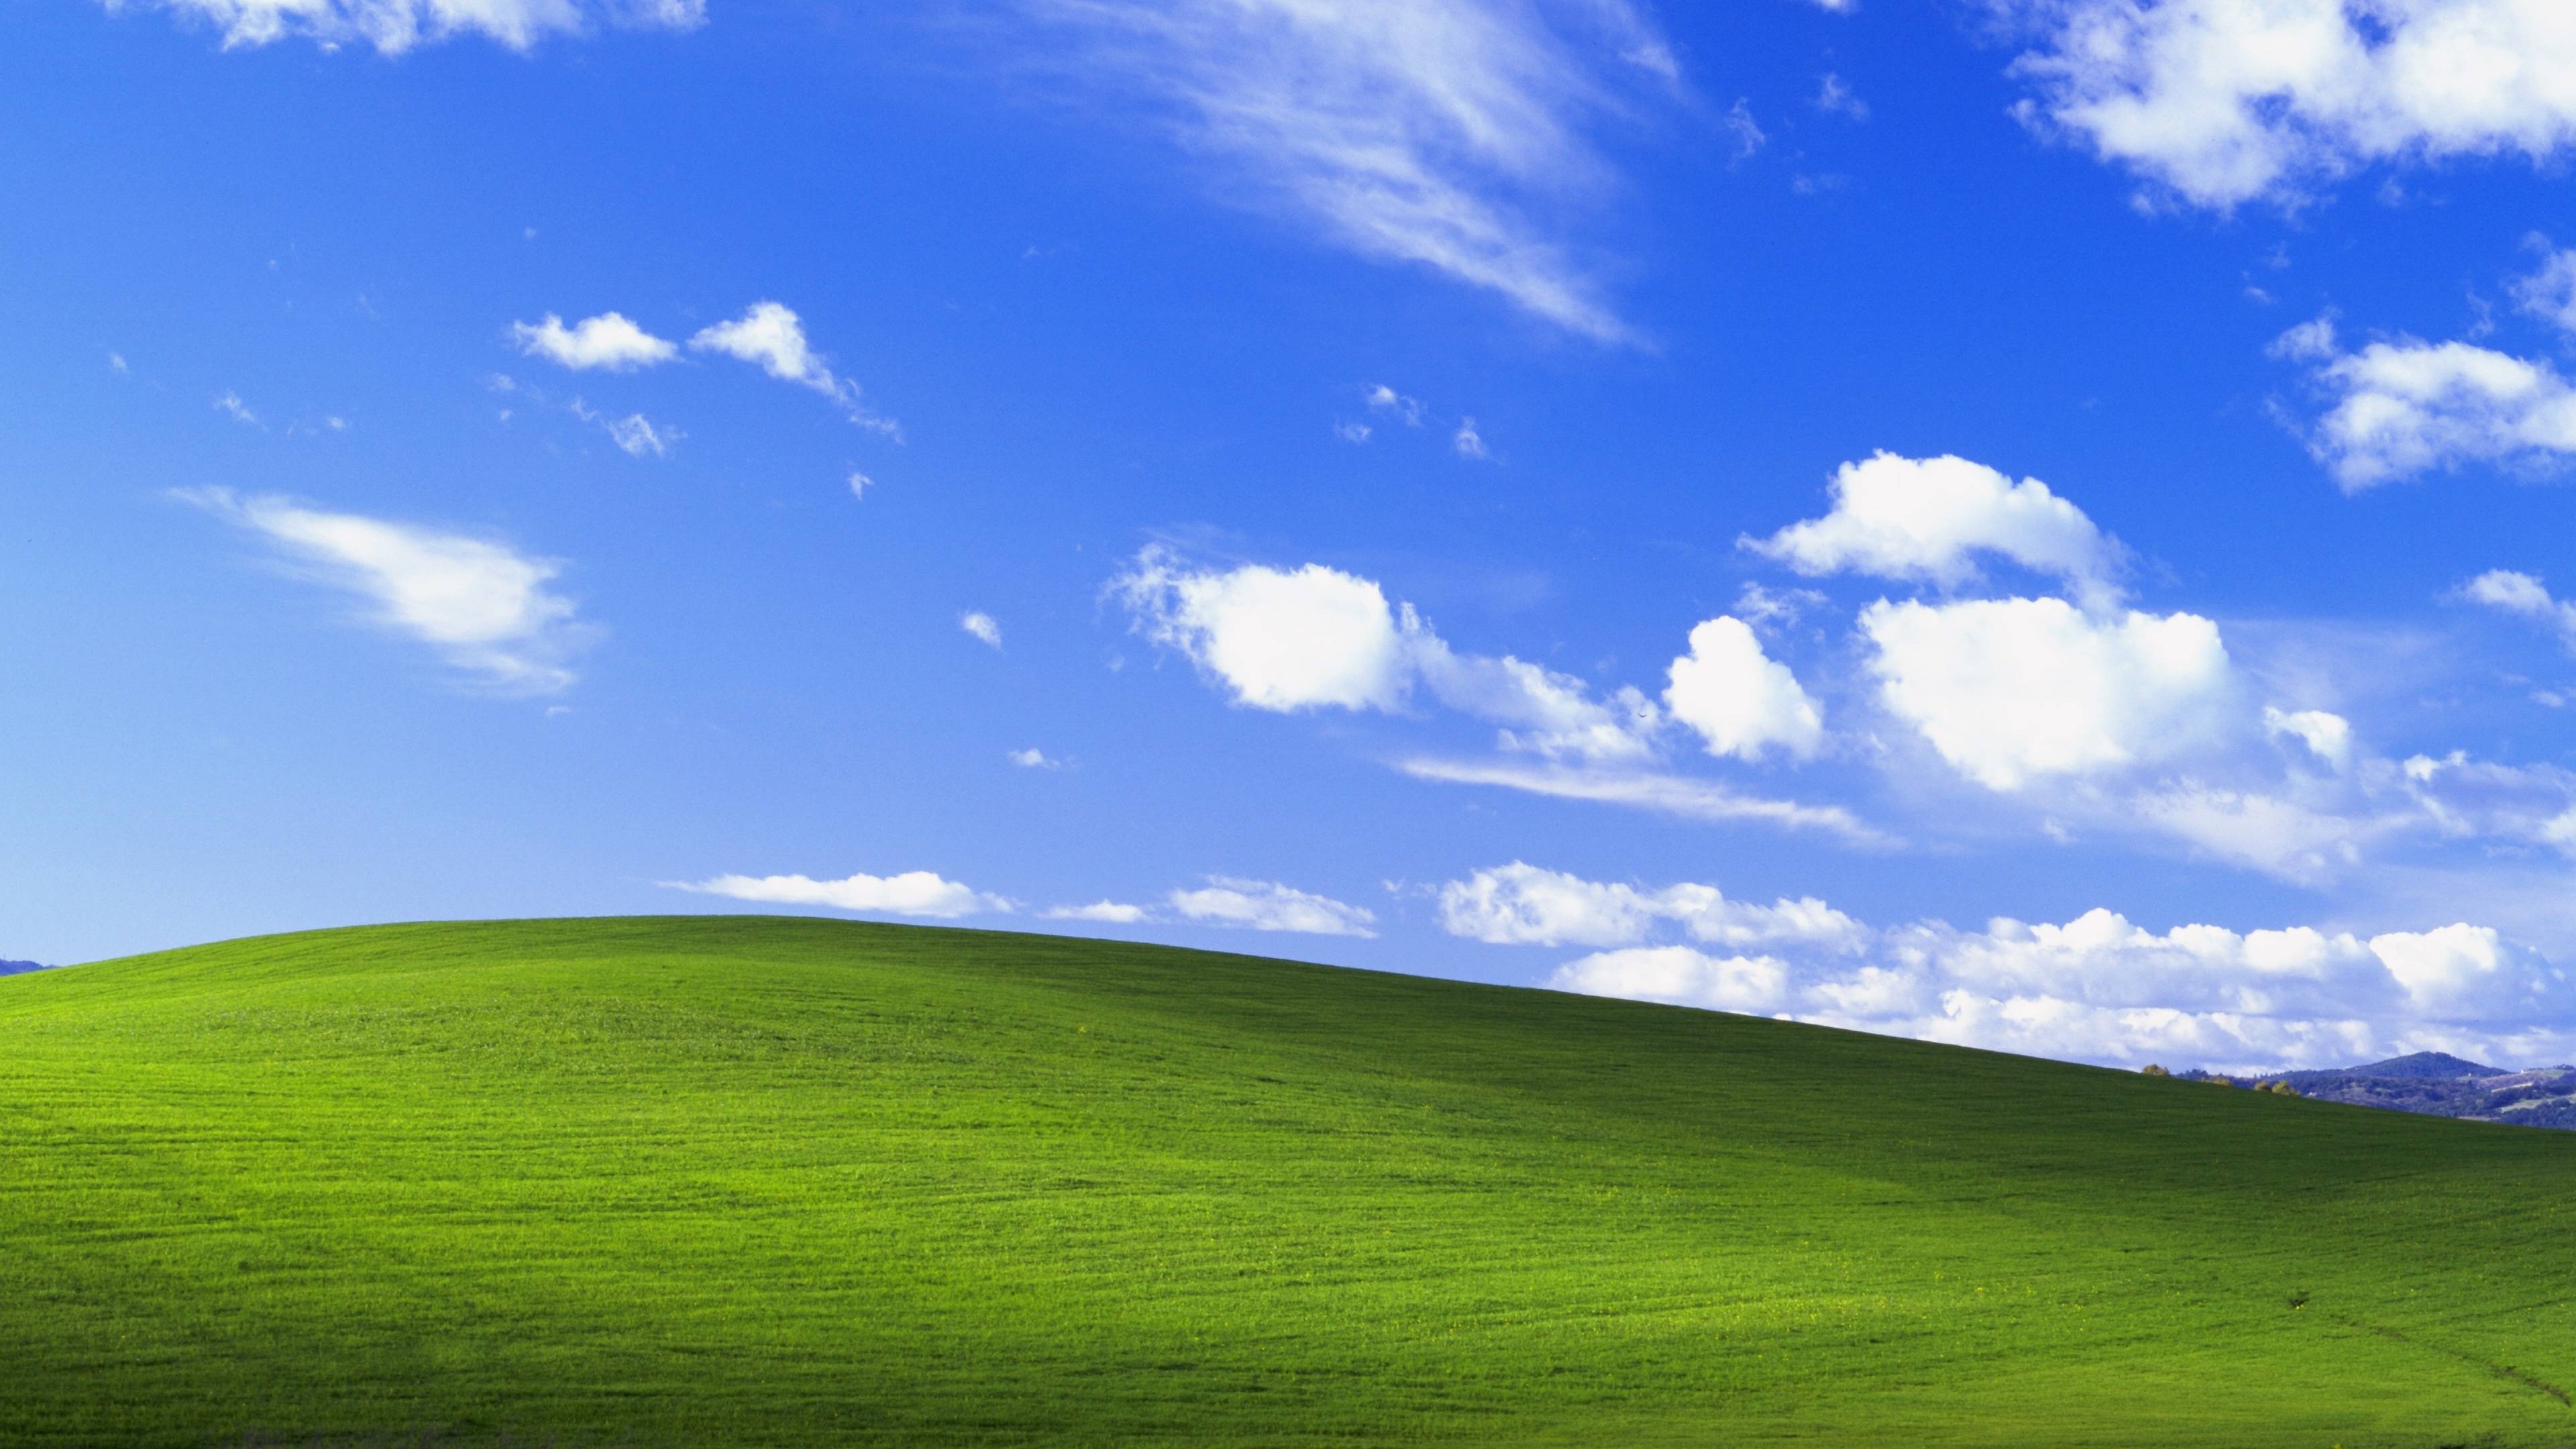 The Windows XP wallpaper at 4K resolution : wallpapers